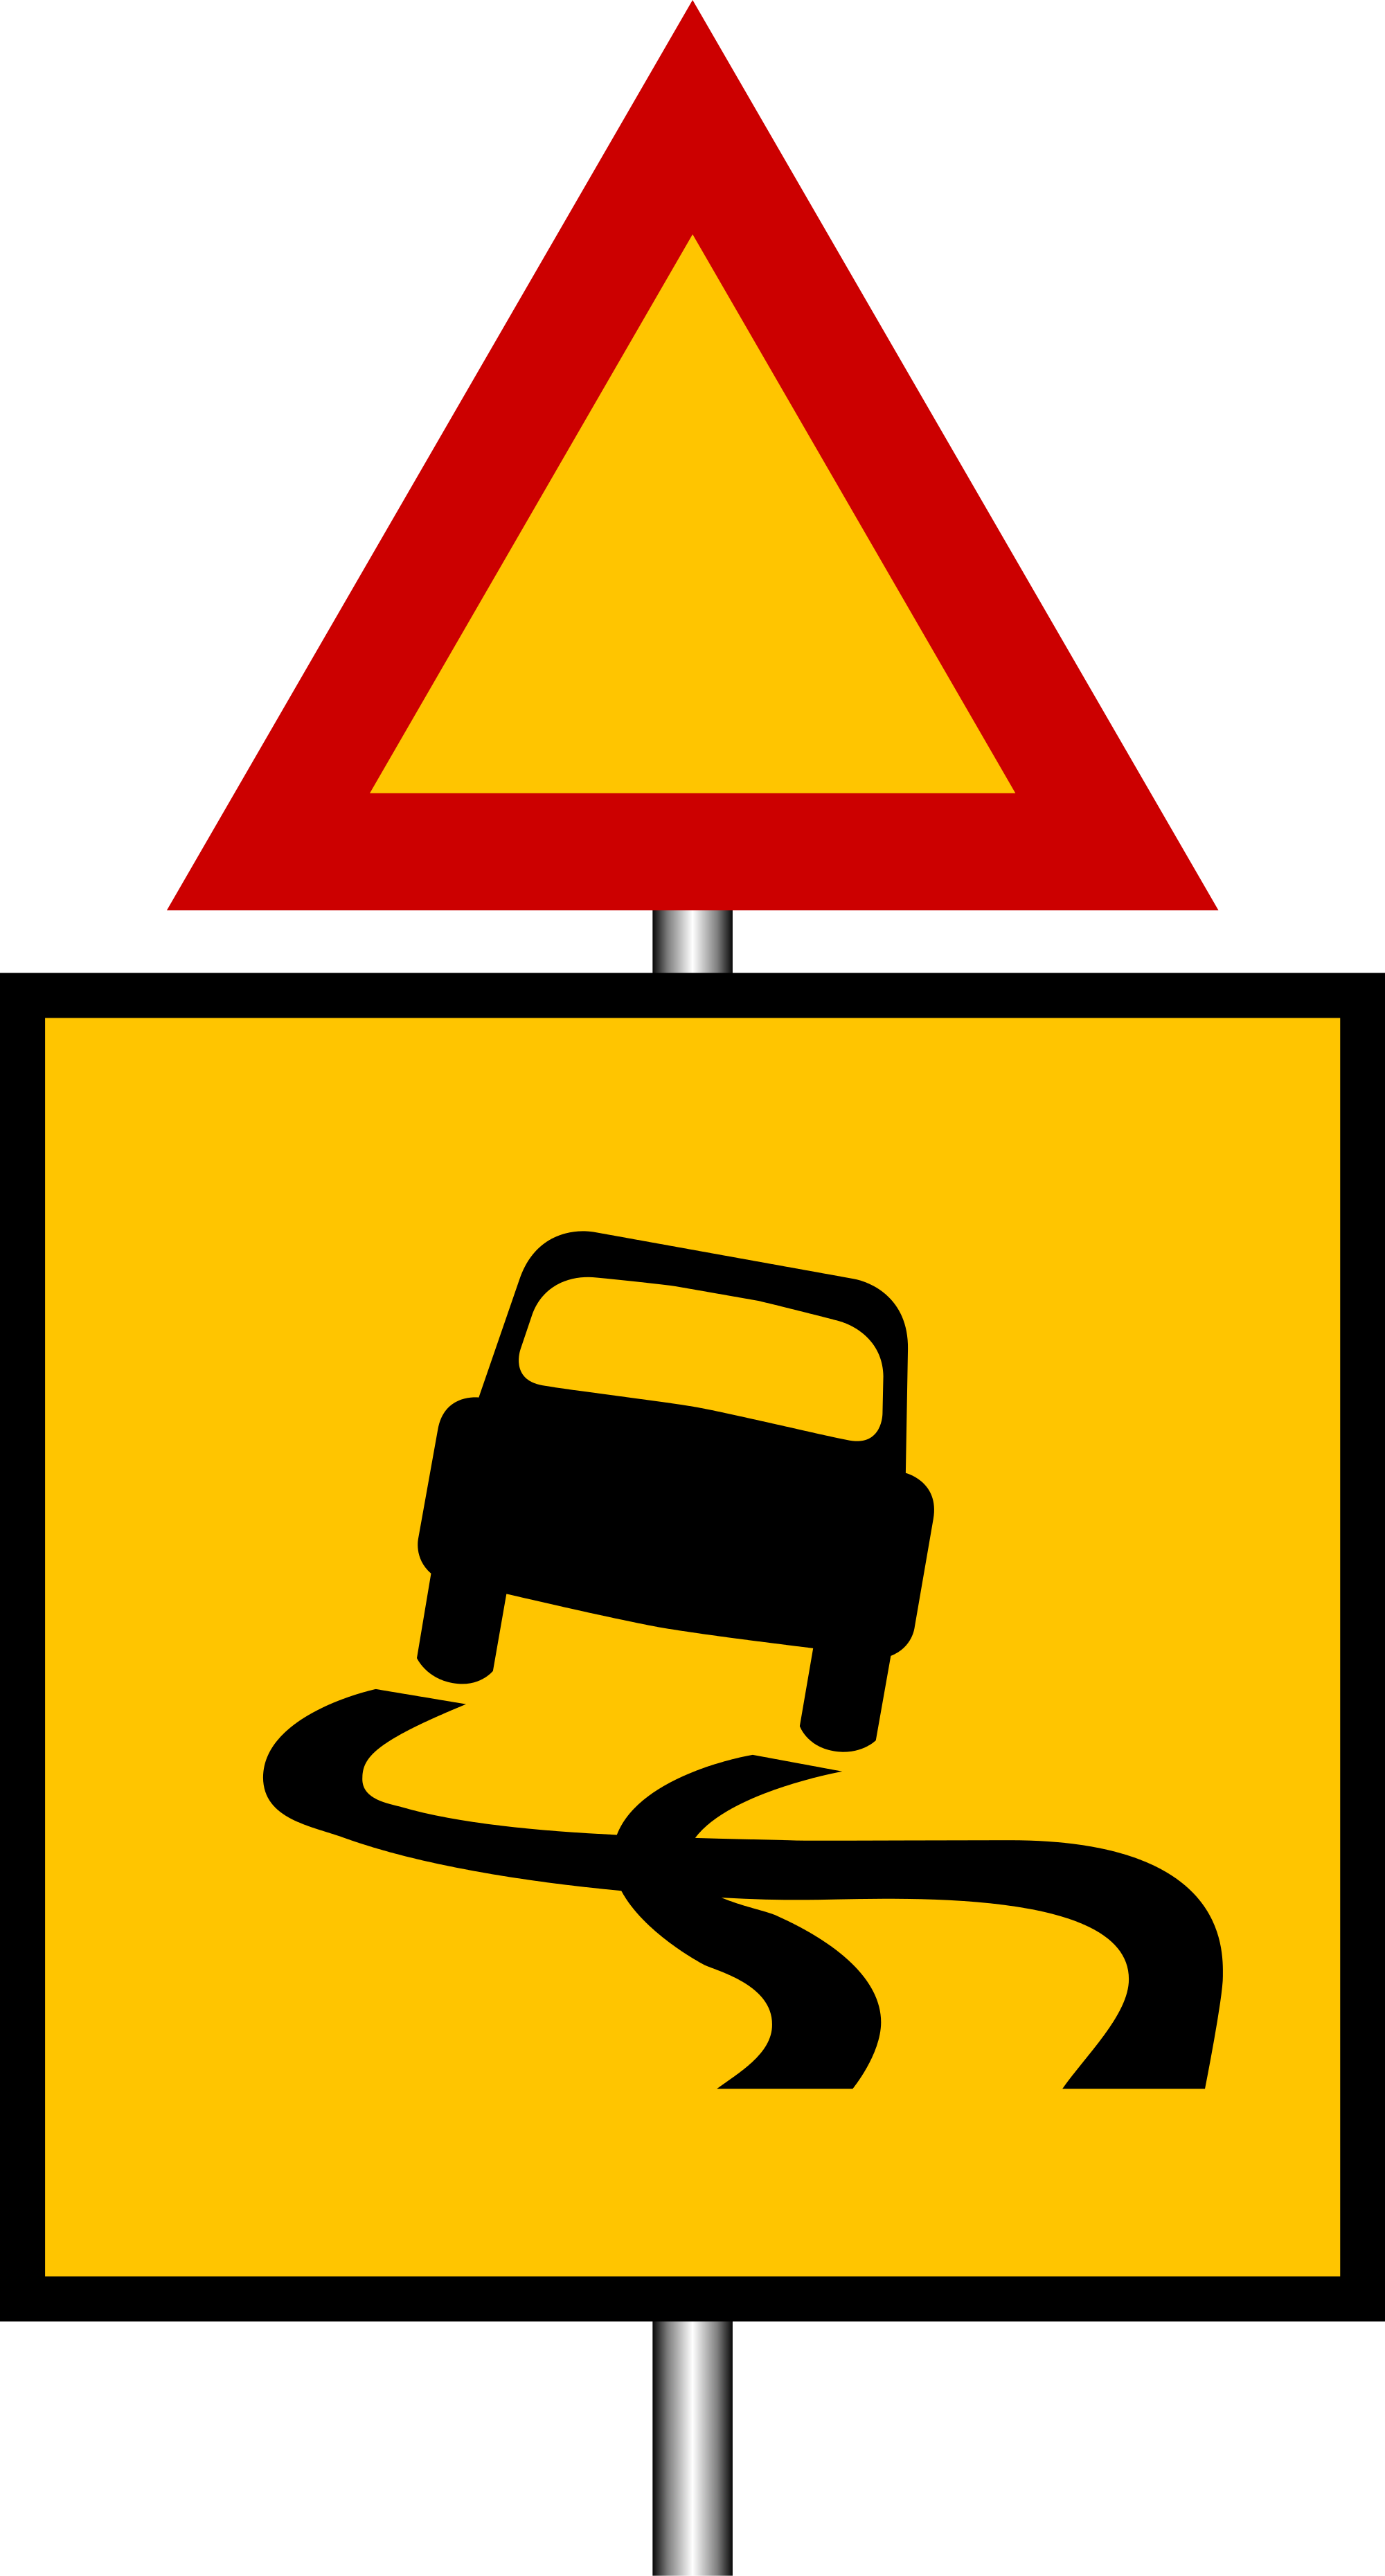 Collection Of Road Danger Signs - Road Signs In Zimbabwe And Their Meanings Pdf (2000x3721)